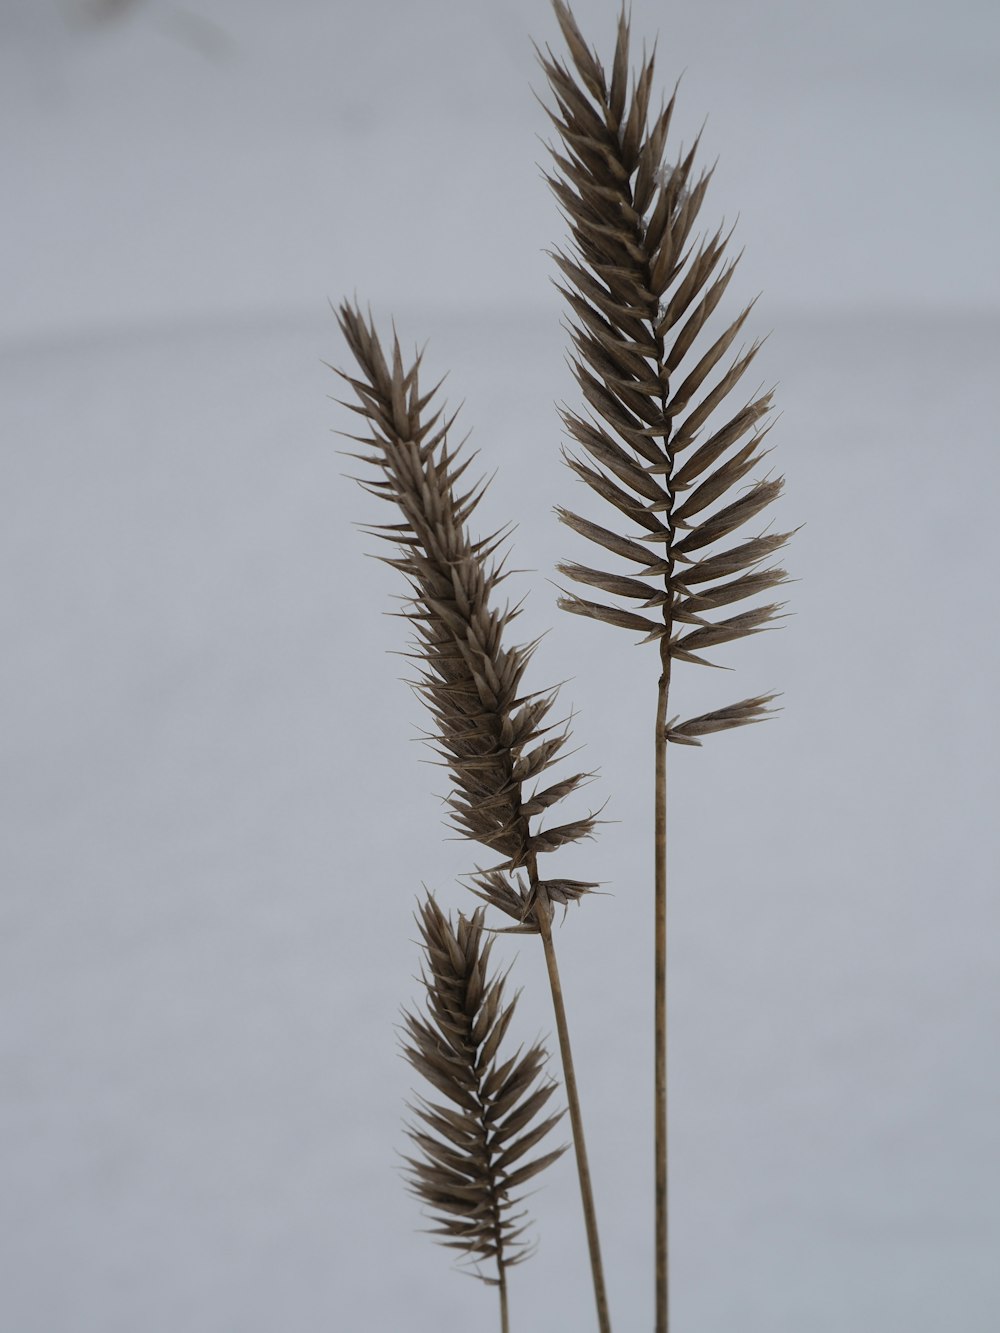 a close up of a plant with snow in the background